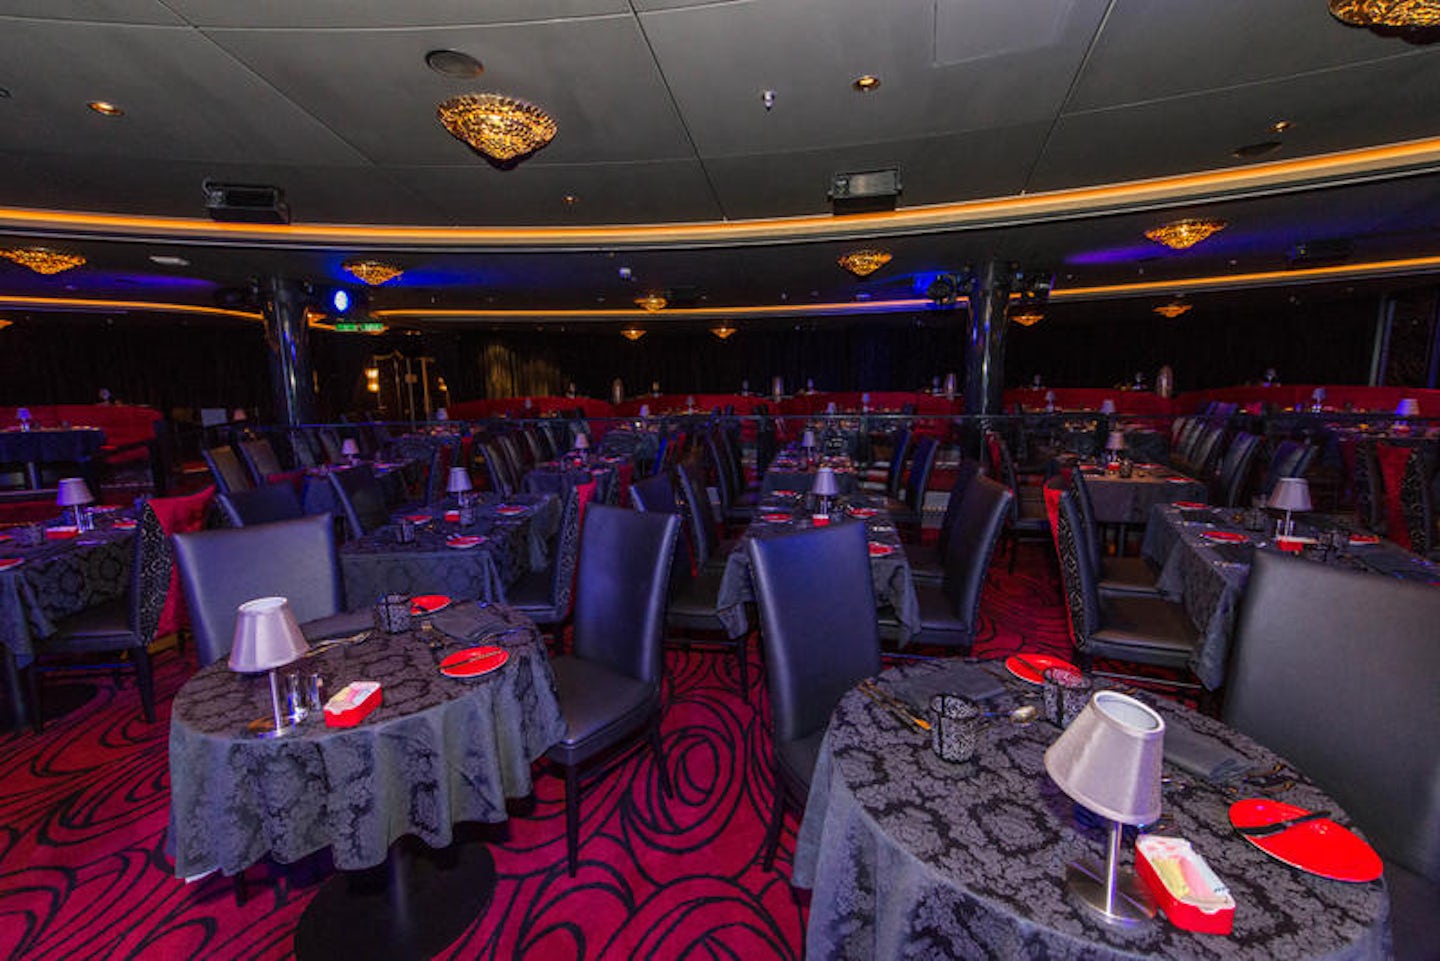 The Supper Club on Norwegian Escape